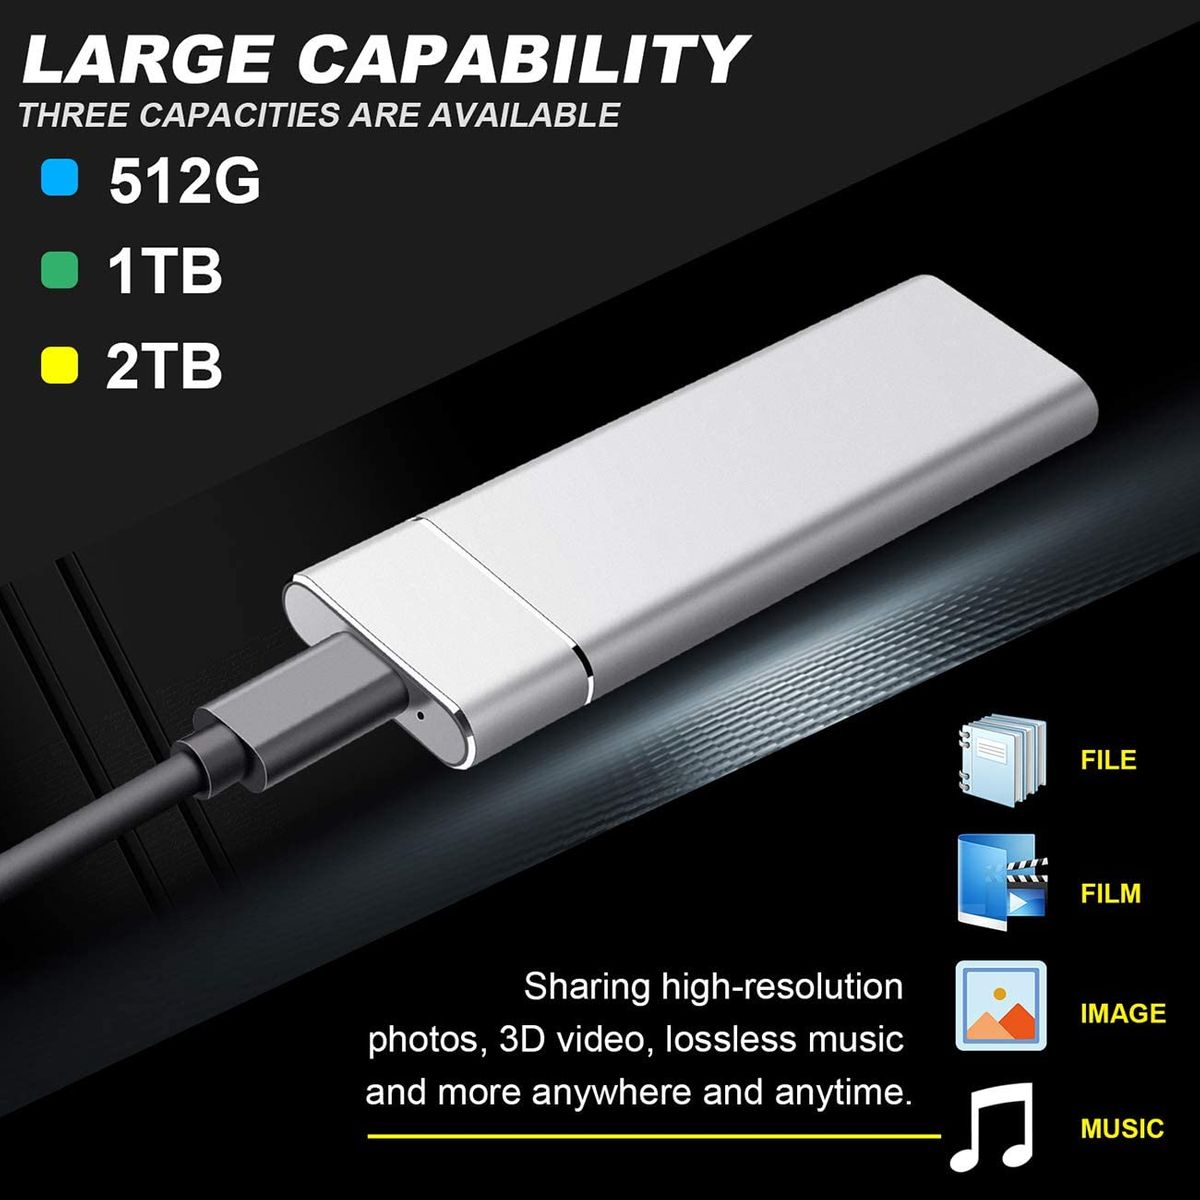 Yagte 2TB USB 3.1 Ultra Slim External Hard Drive for PC, Mac, Xbox and Android with Type C Cable BLACK